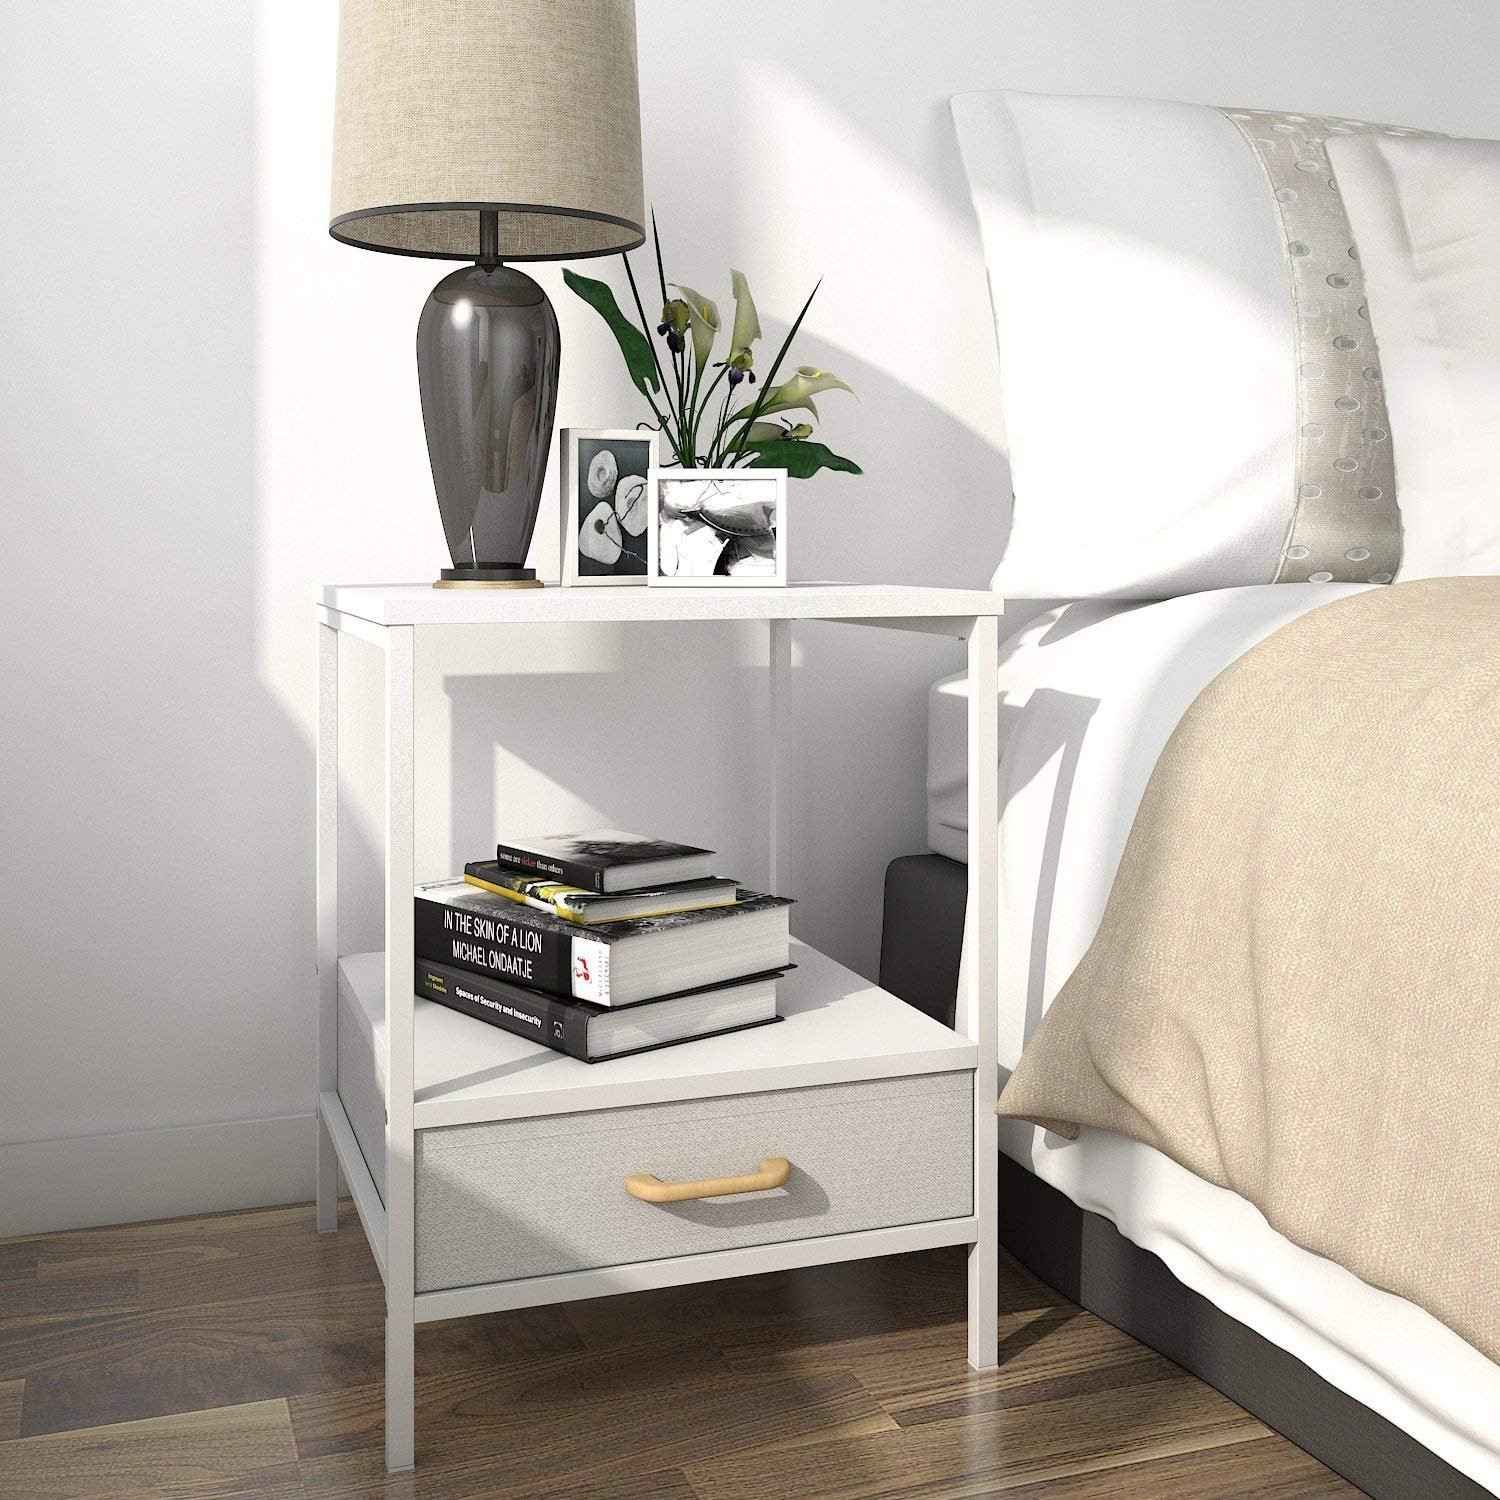 Small Bedroom End Tables
 Lifewit Small Nightstand Bedside Table End Table with